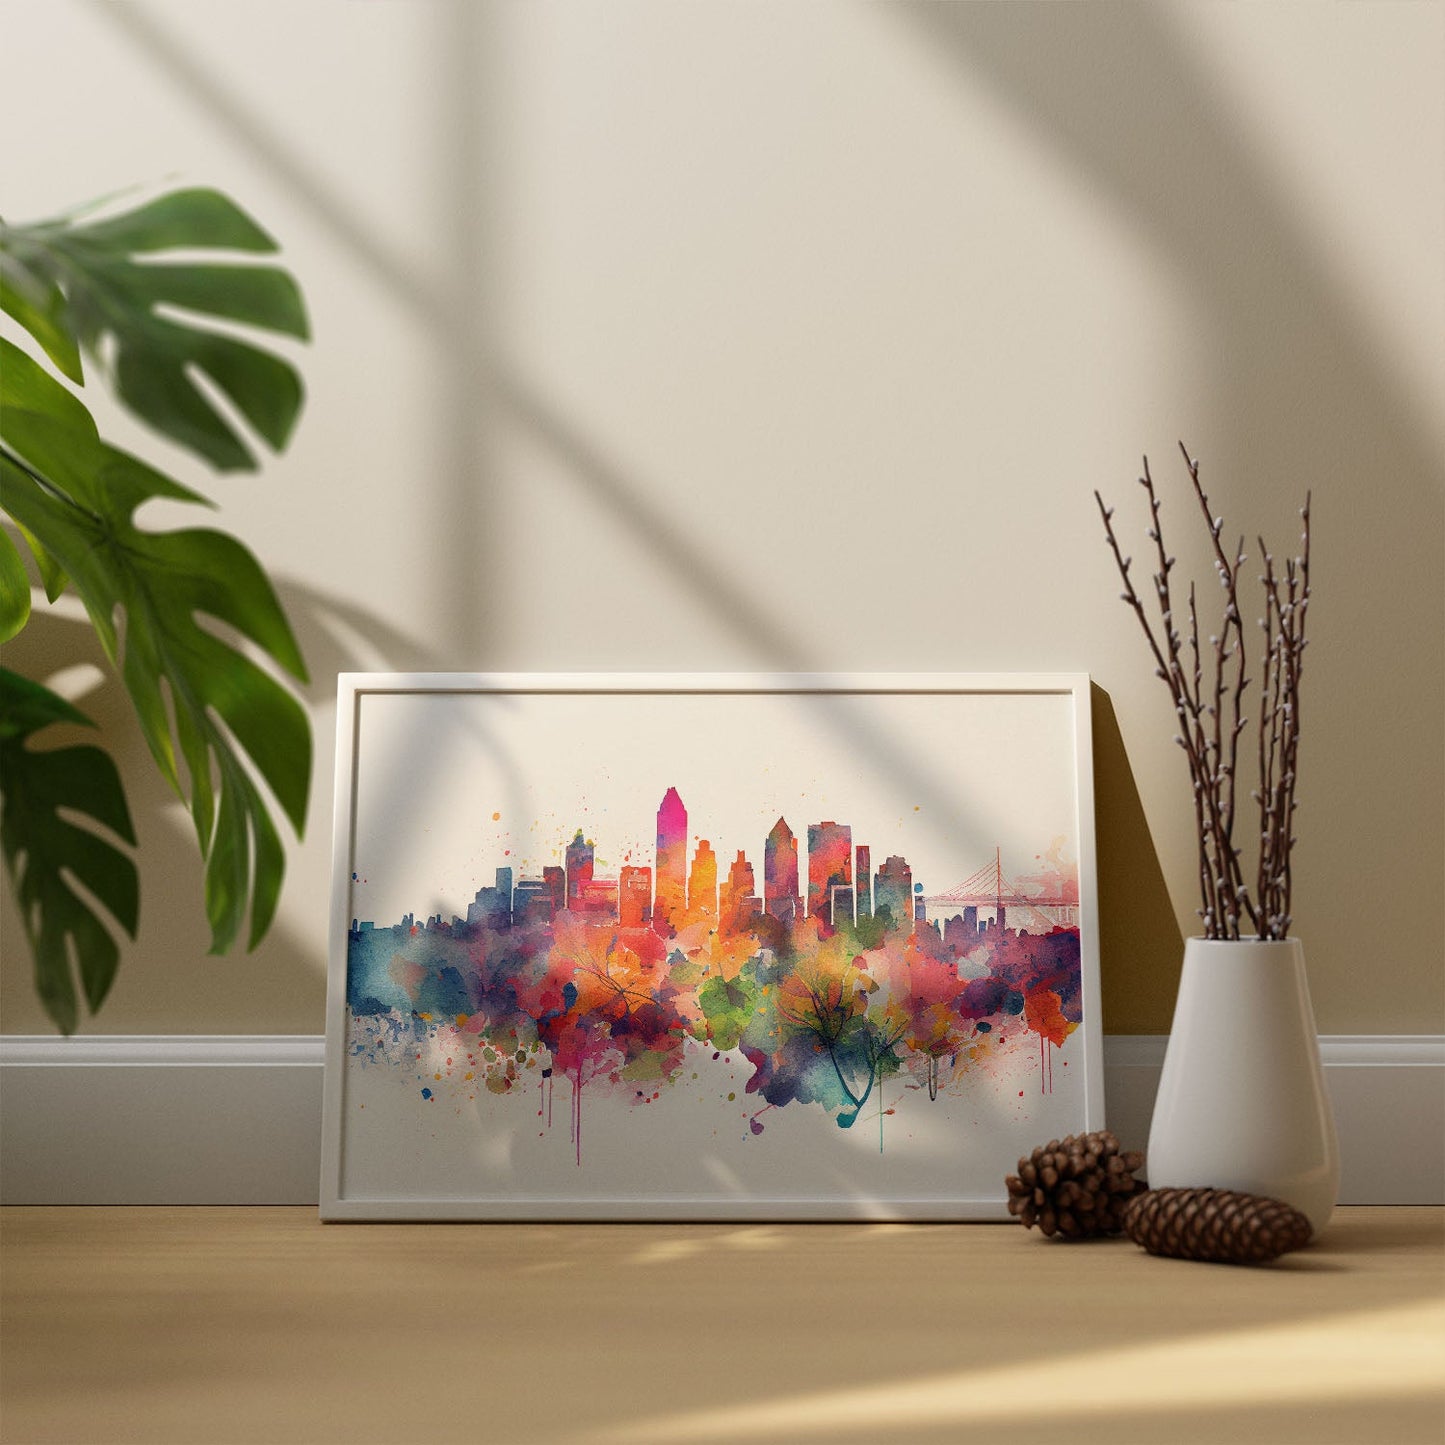 Nacnic watercolor of a skyline of the city of Montreal_1. Aesthetic Wall Art Prints for Bedroom or Living Room Design.-Artwork-Nacnic-A4-Sin Marco-Nacnic Estudio SL